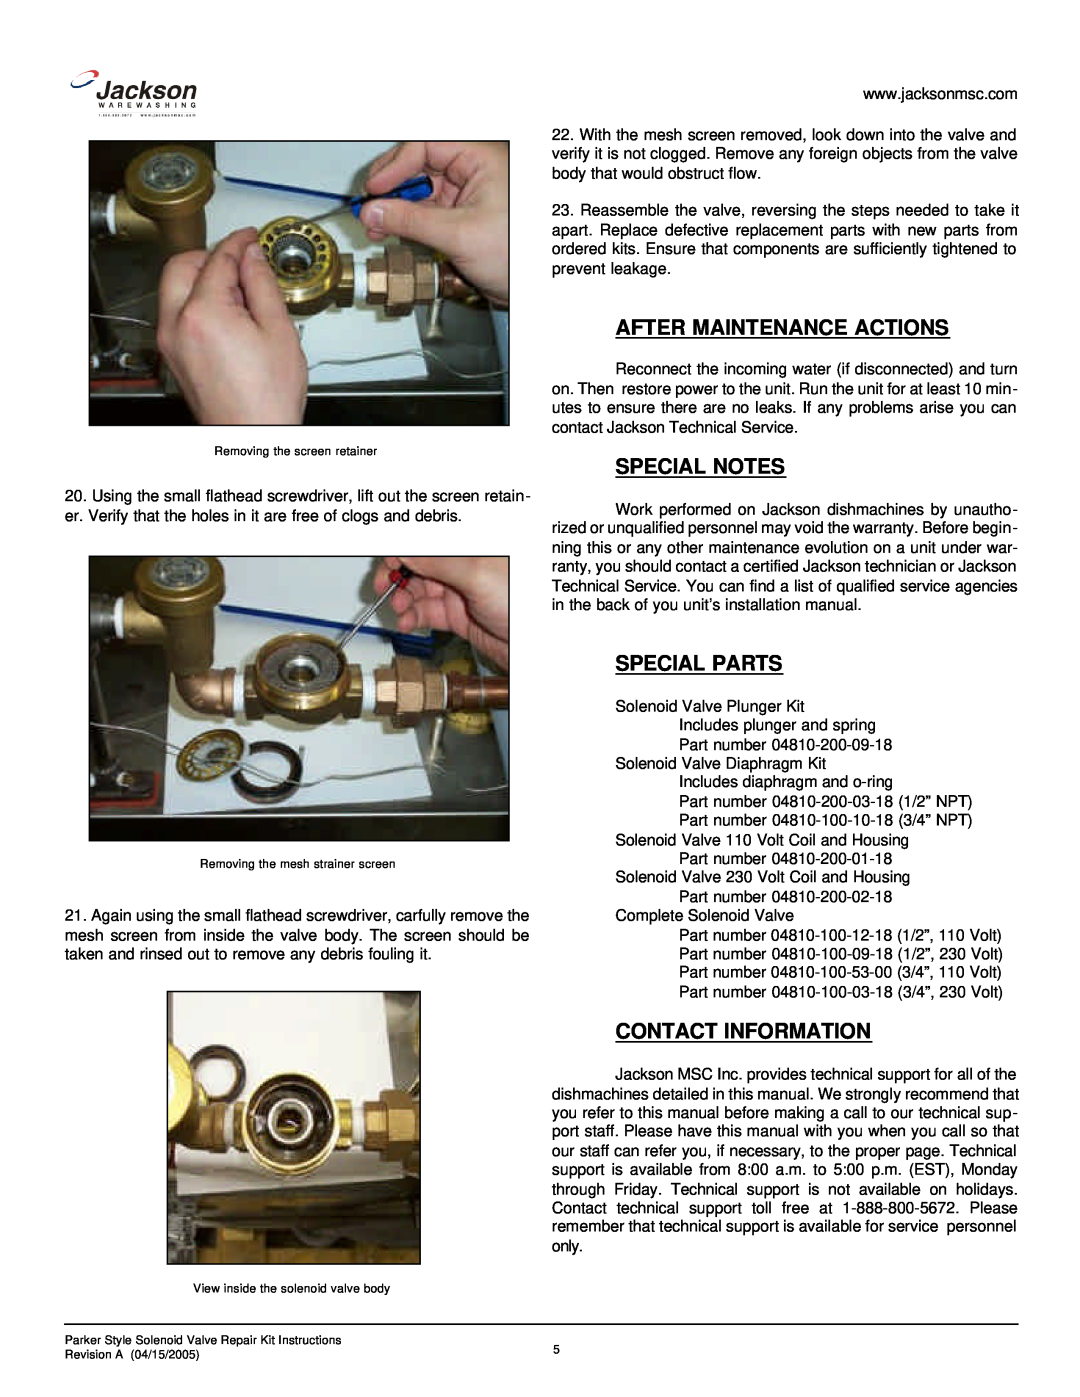 Jackson Dishmachine Component manual After Maintenance Actions, Special Notes, Special Parts, Contact Information 